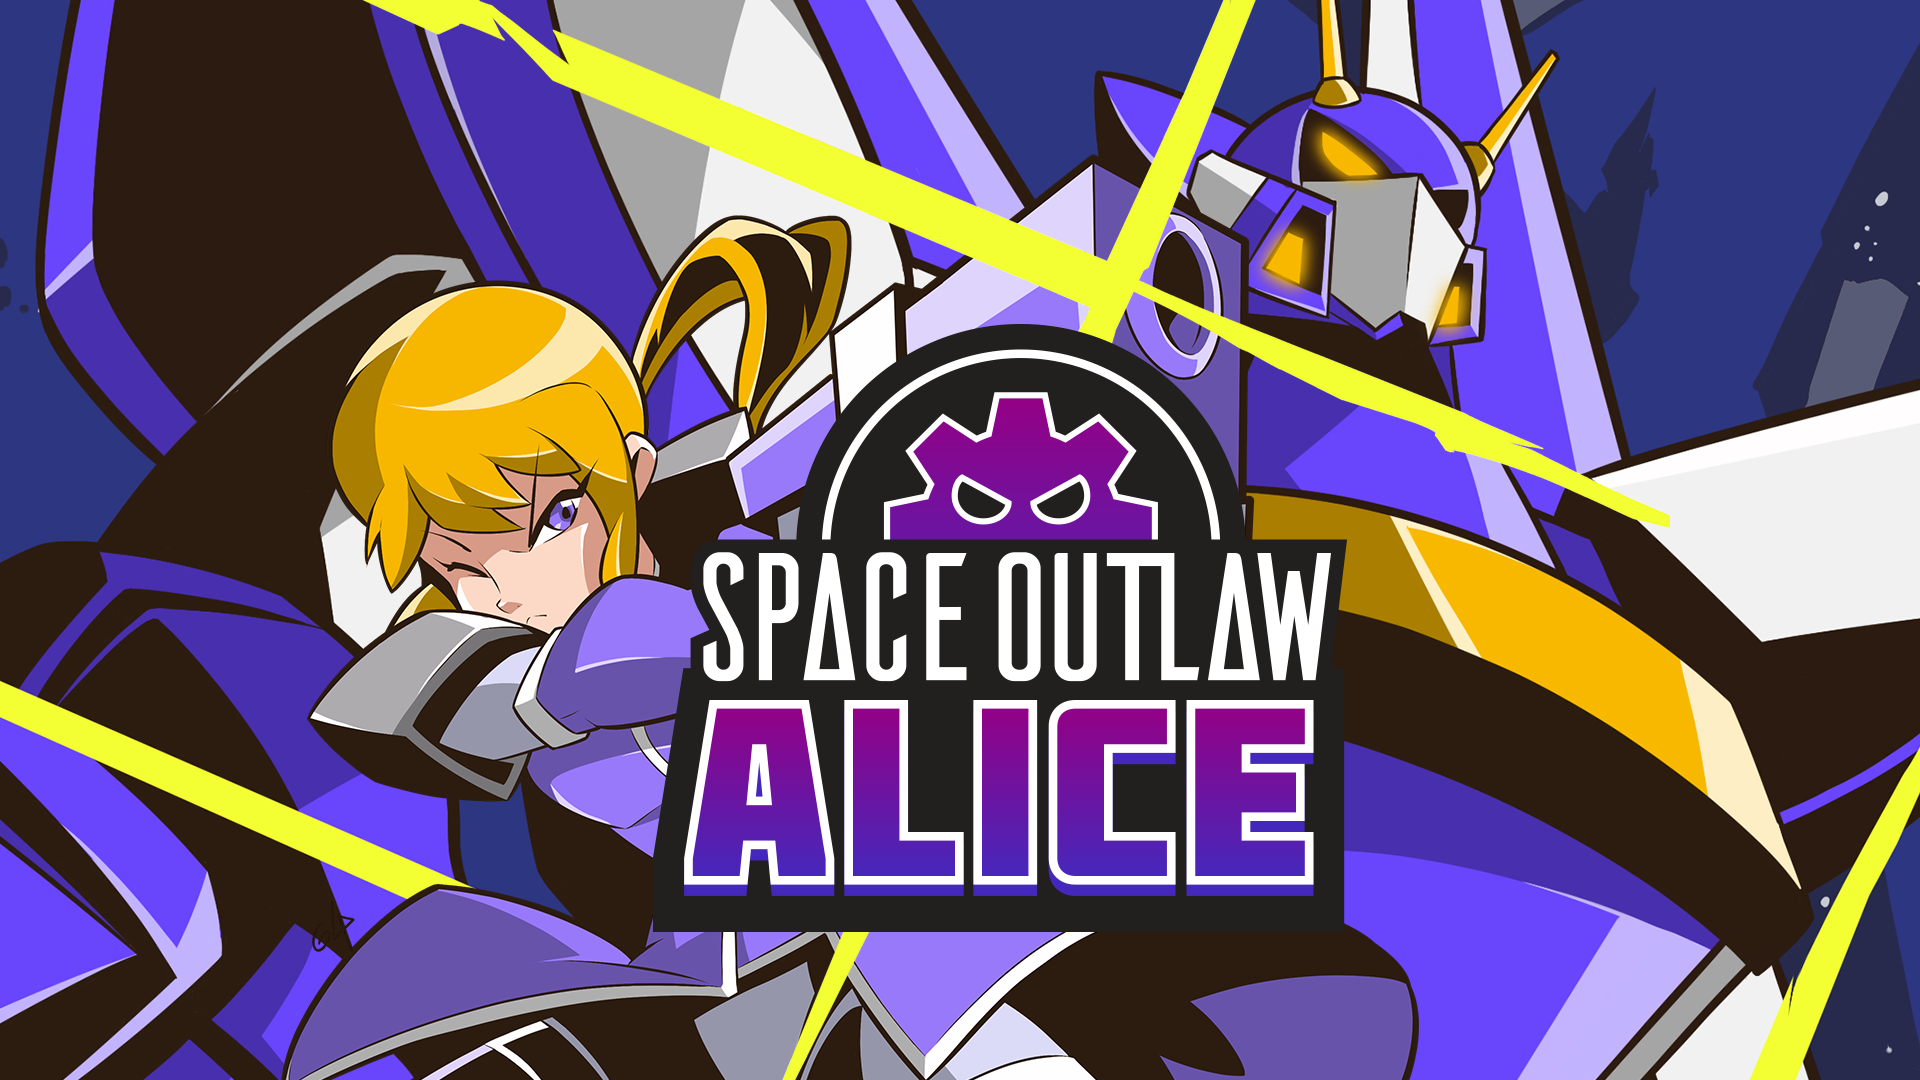 Space Outlaw Alice